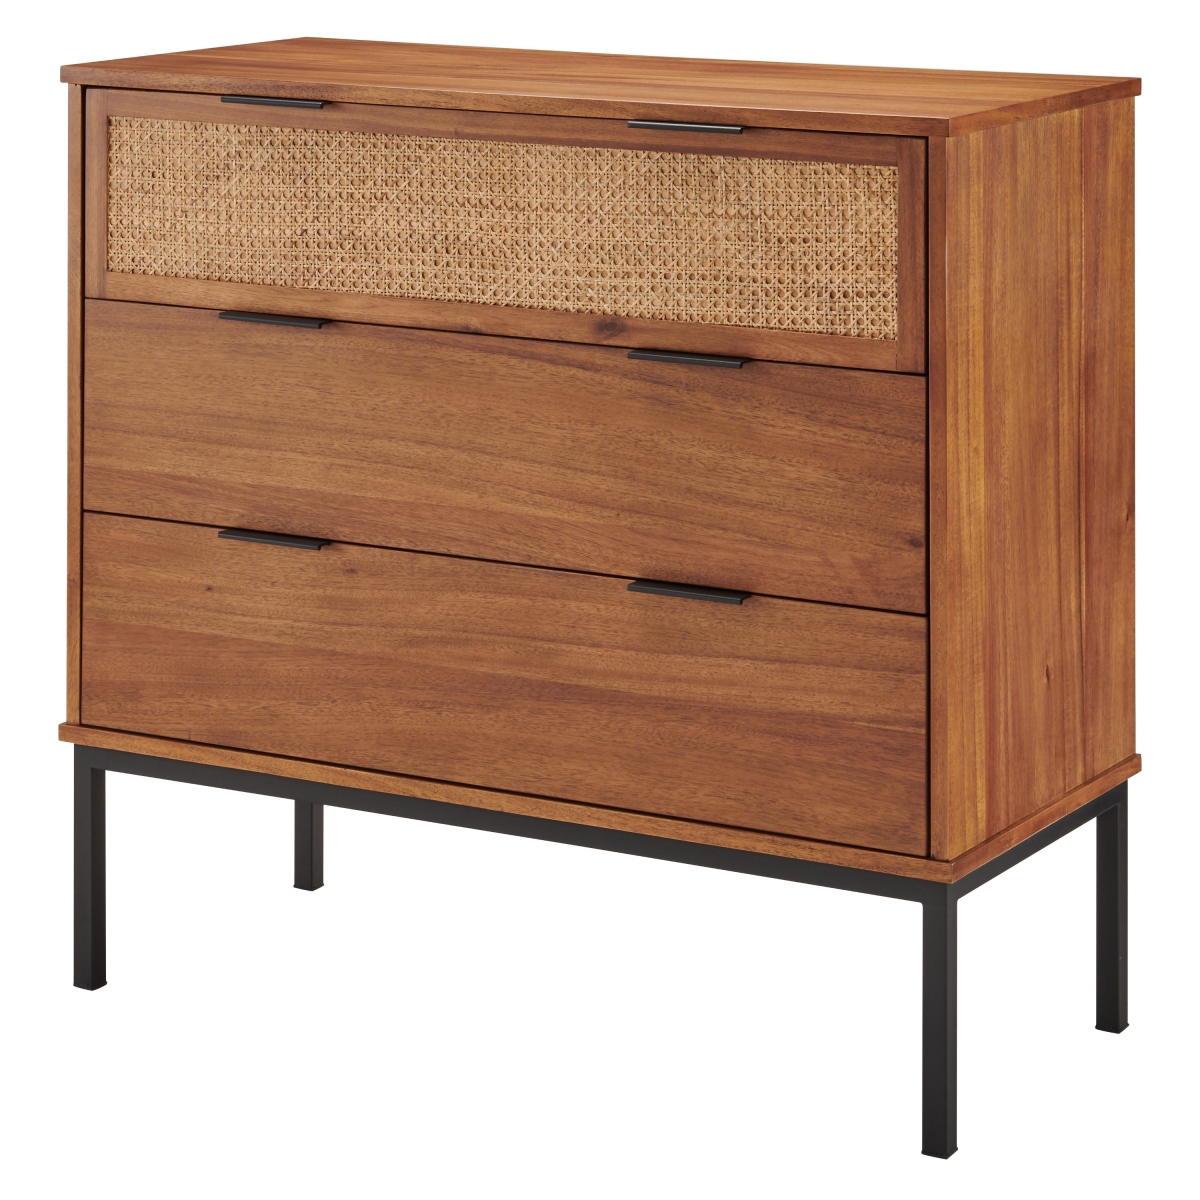 8000062 17.5 X 39.5 X 37 In. Caine Rattan Chest With 3 Drawers, Brown